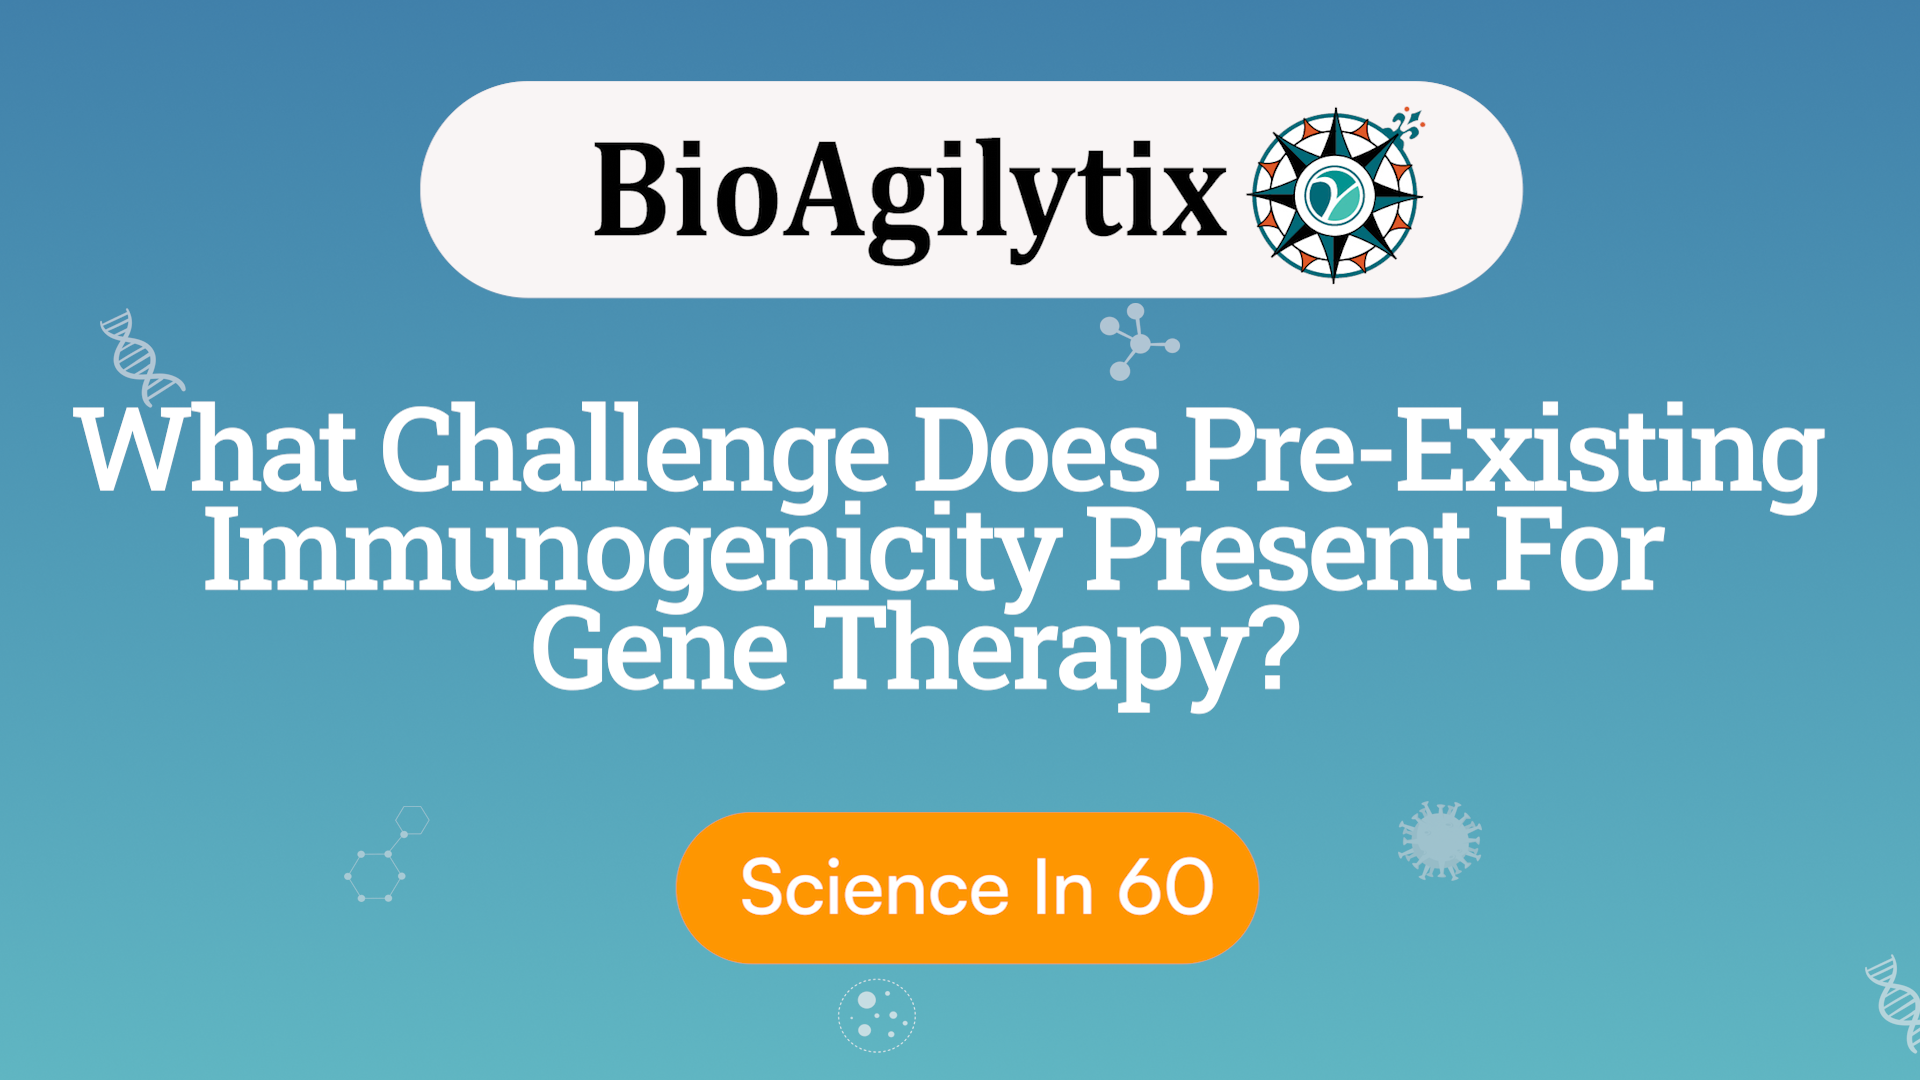 What Challenge Does Pre-Existing Immunogenicity Present for Gene Therapy?